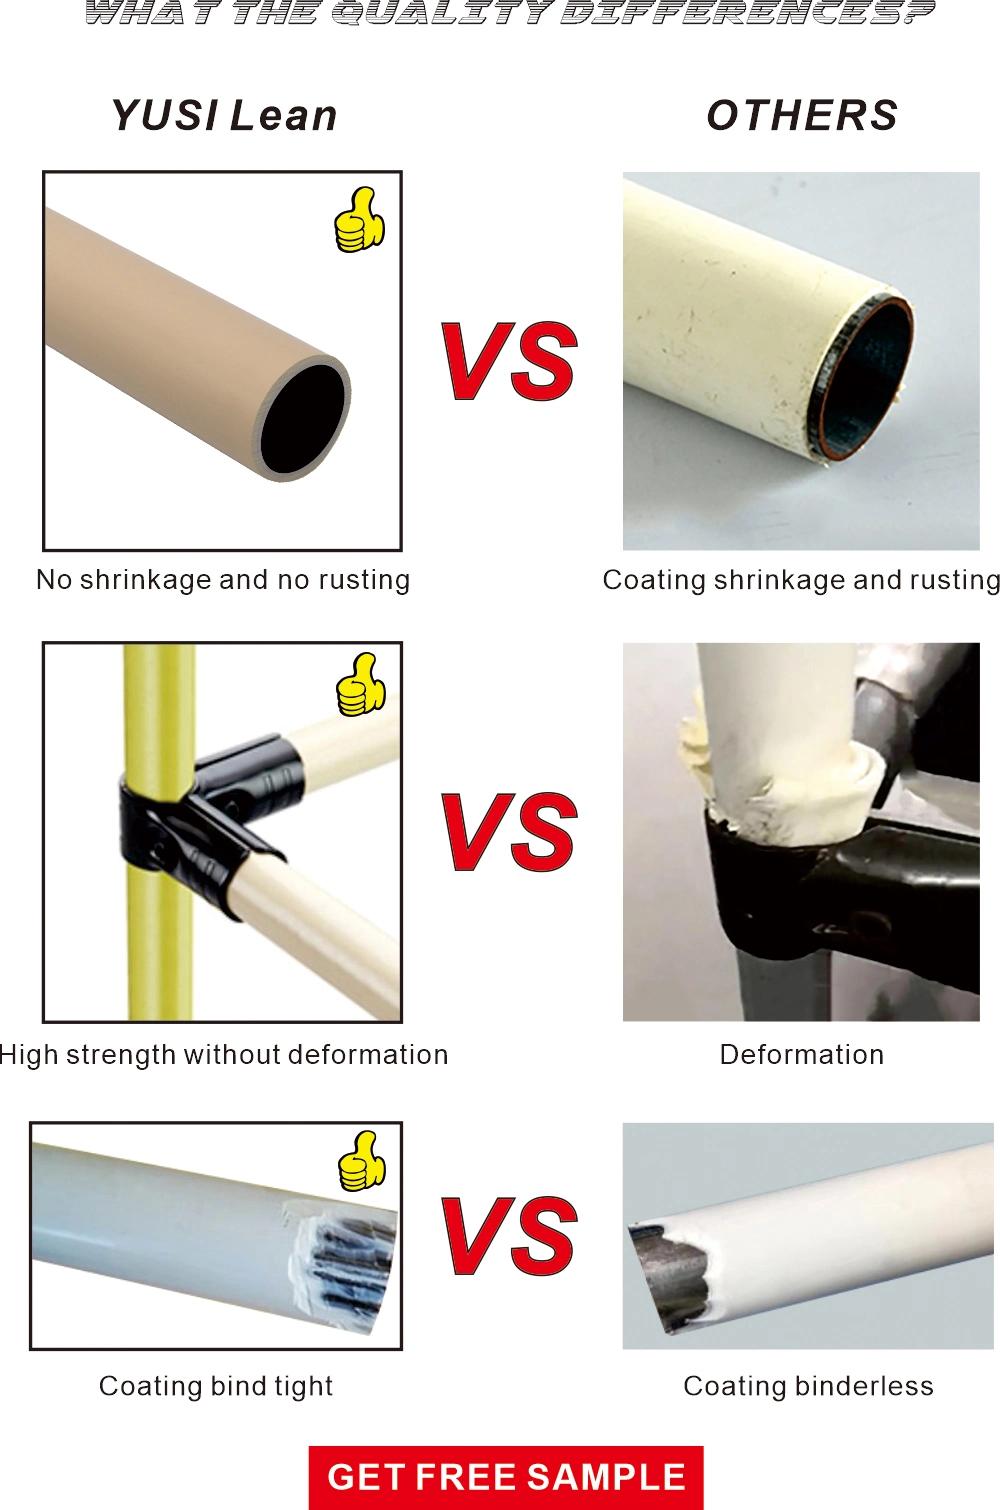 Coated Pipe Composite Pipe Plastic Steel Pipe and Joint System for Lean Rack, Workstation, Shelving